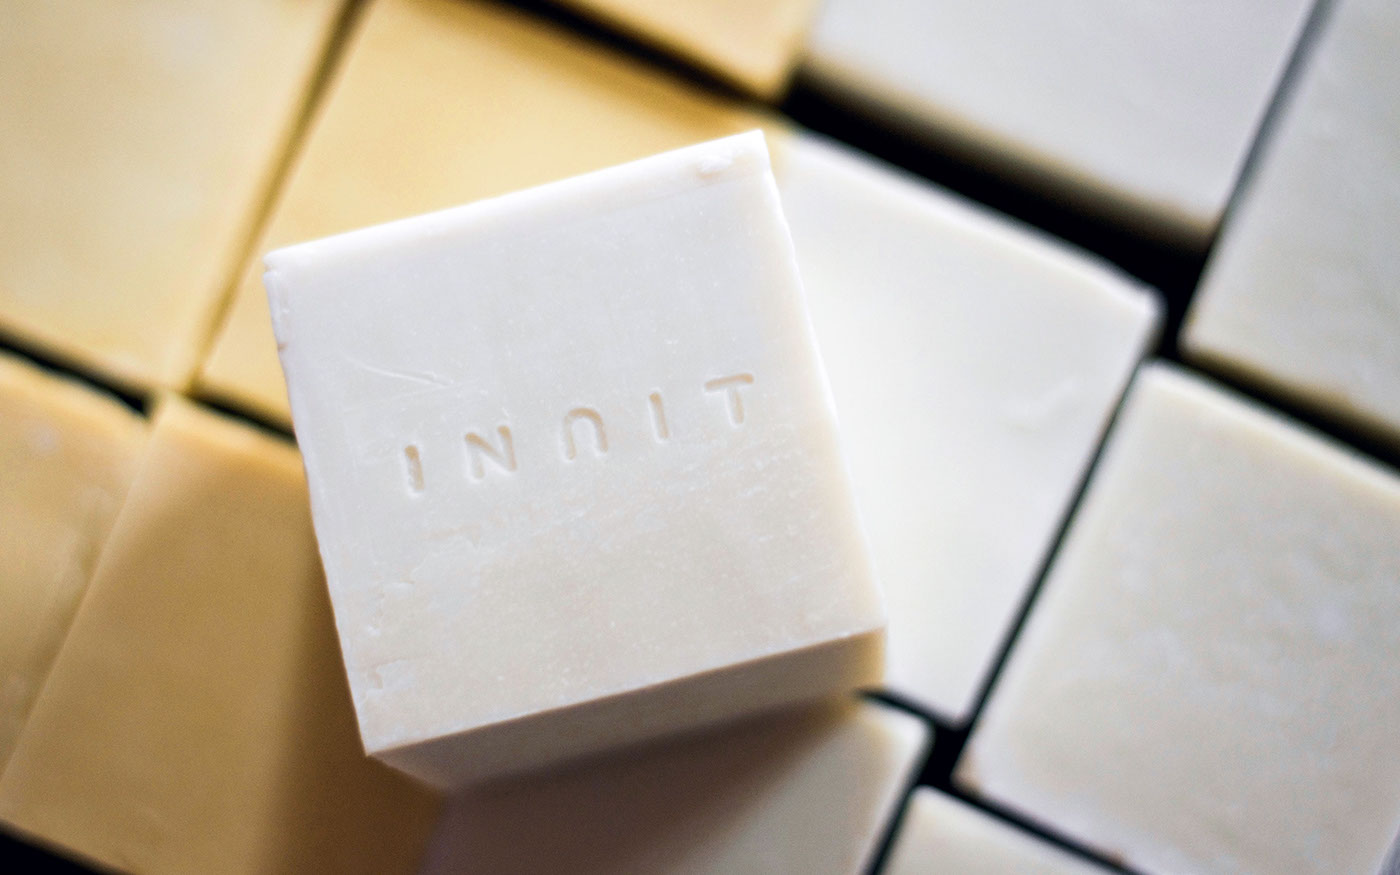 Packaging Inuit soap solo cosmetics barcelona